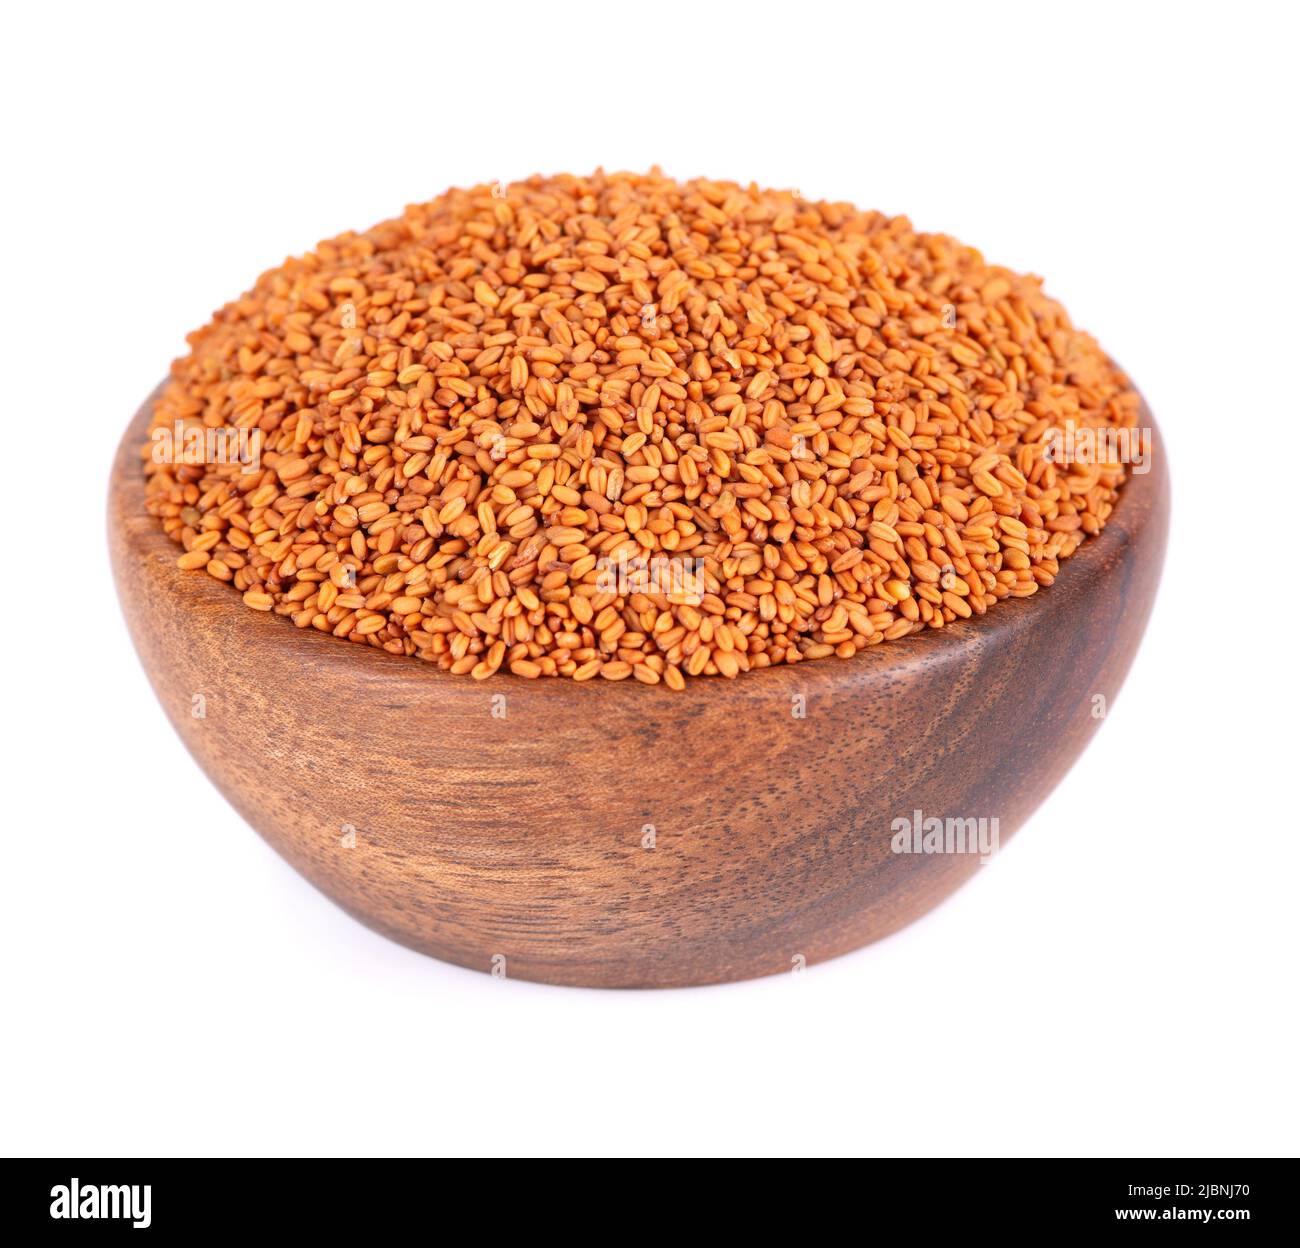 Camelina sativa seeds in wooden bowl, isolated on white background. Seeds of camelina or false flax. Raw material for camelina oil Stock Photo